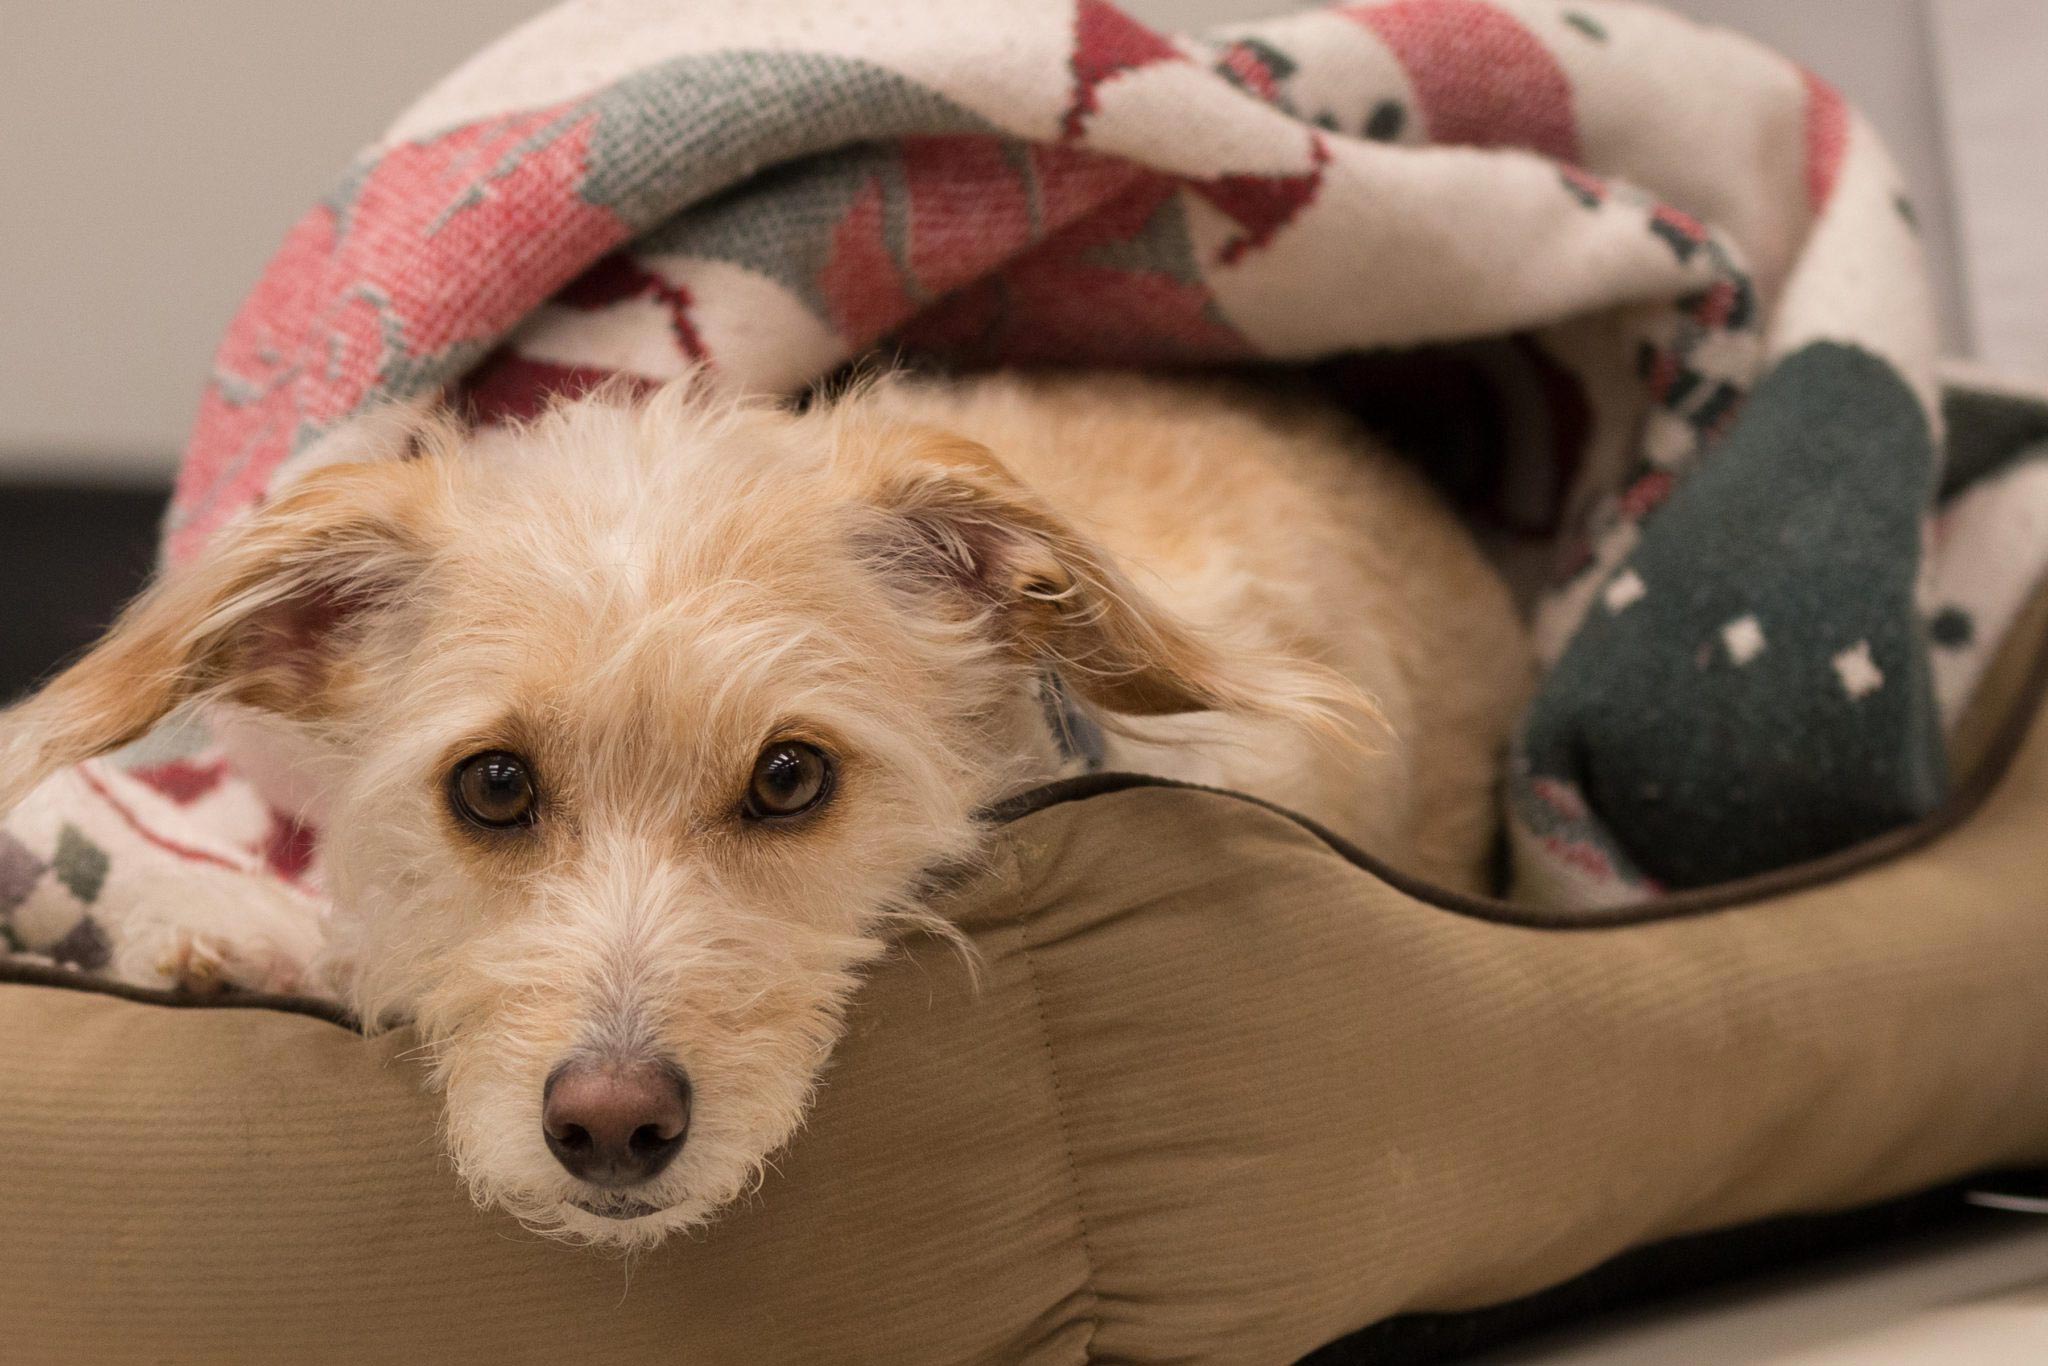 How to Tell if a Dog Is Pregnant At Home: 7 Signs & 4 Tests